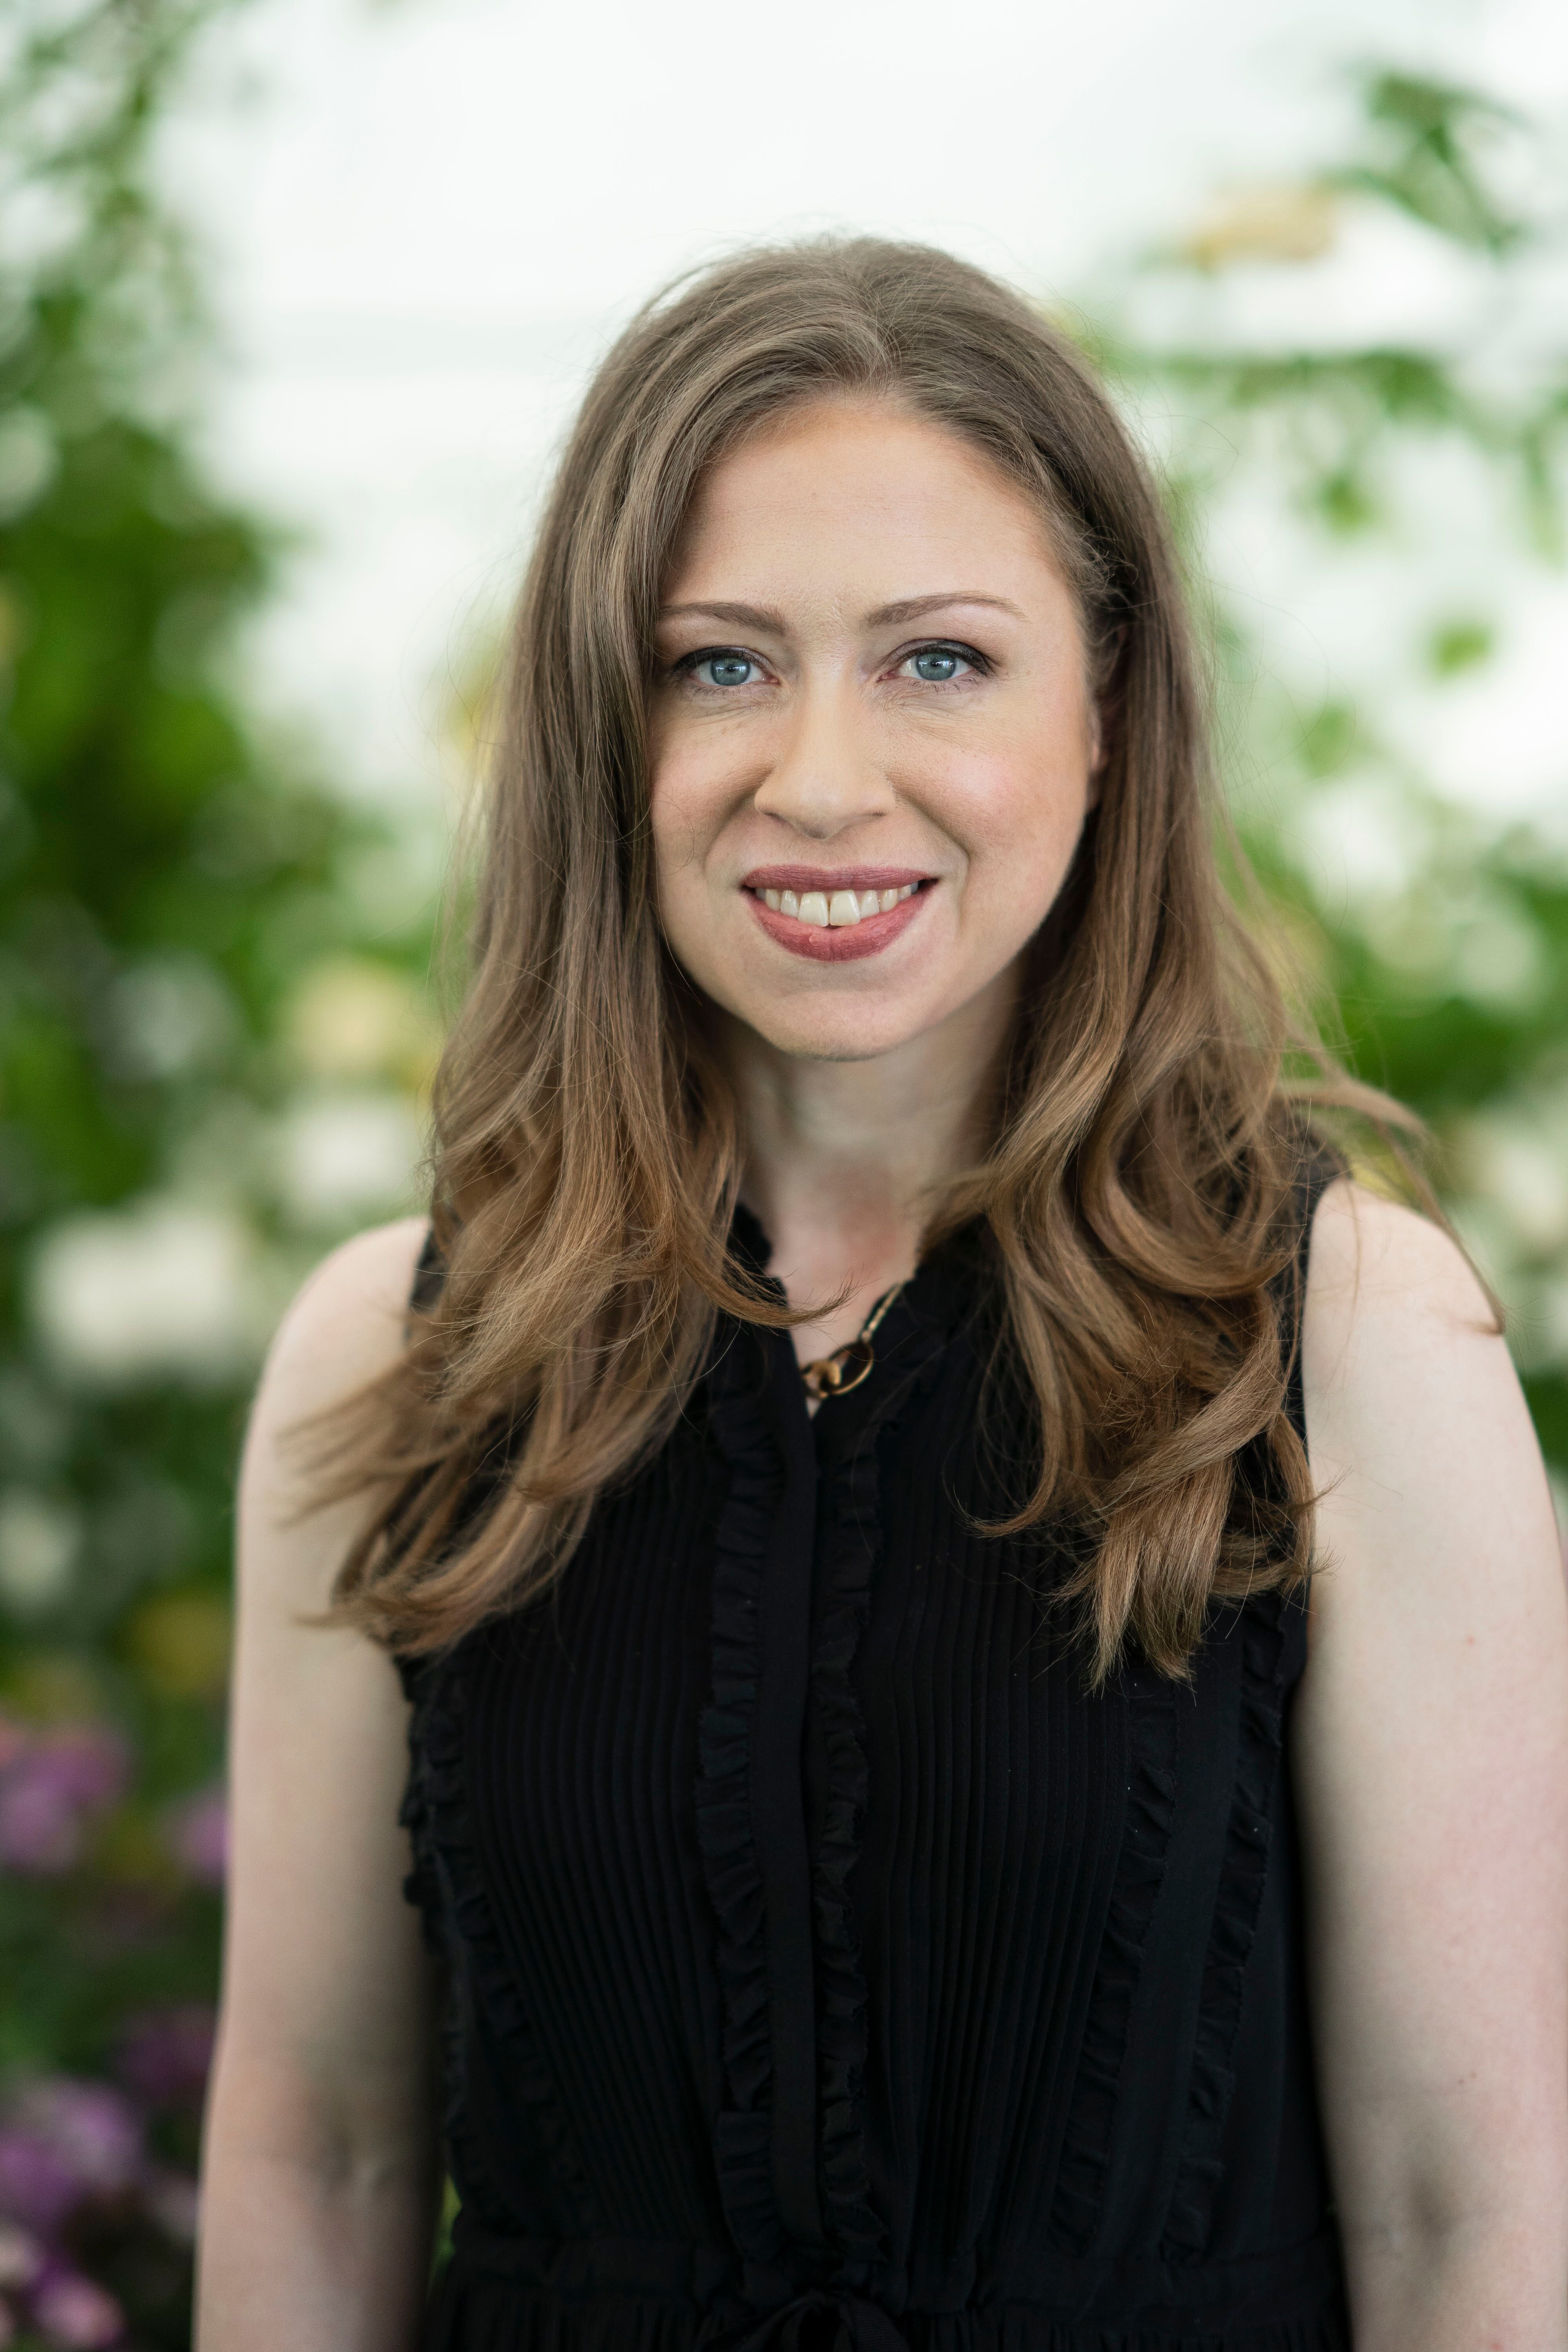 Chelsea Clinton at the Hay Festival. | Source: Getty Images